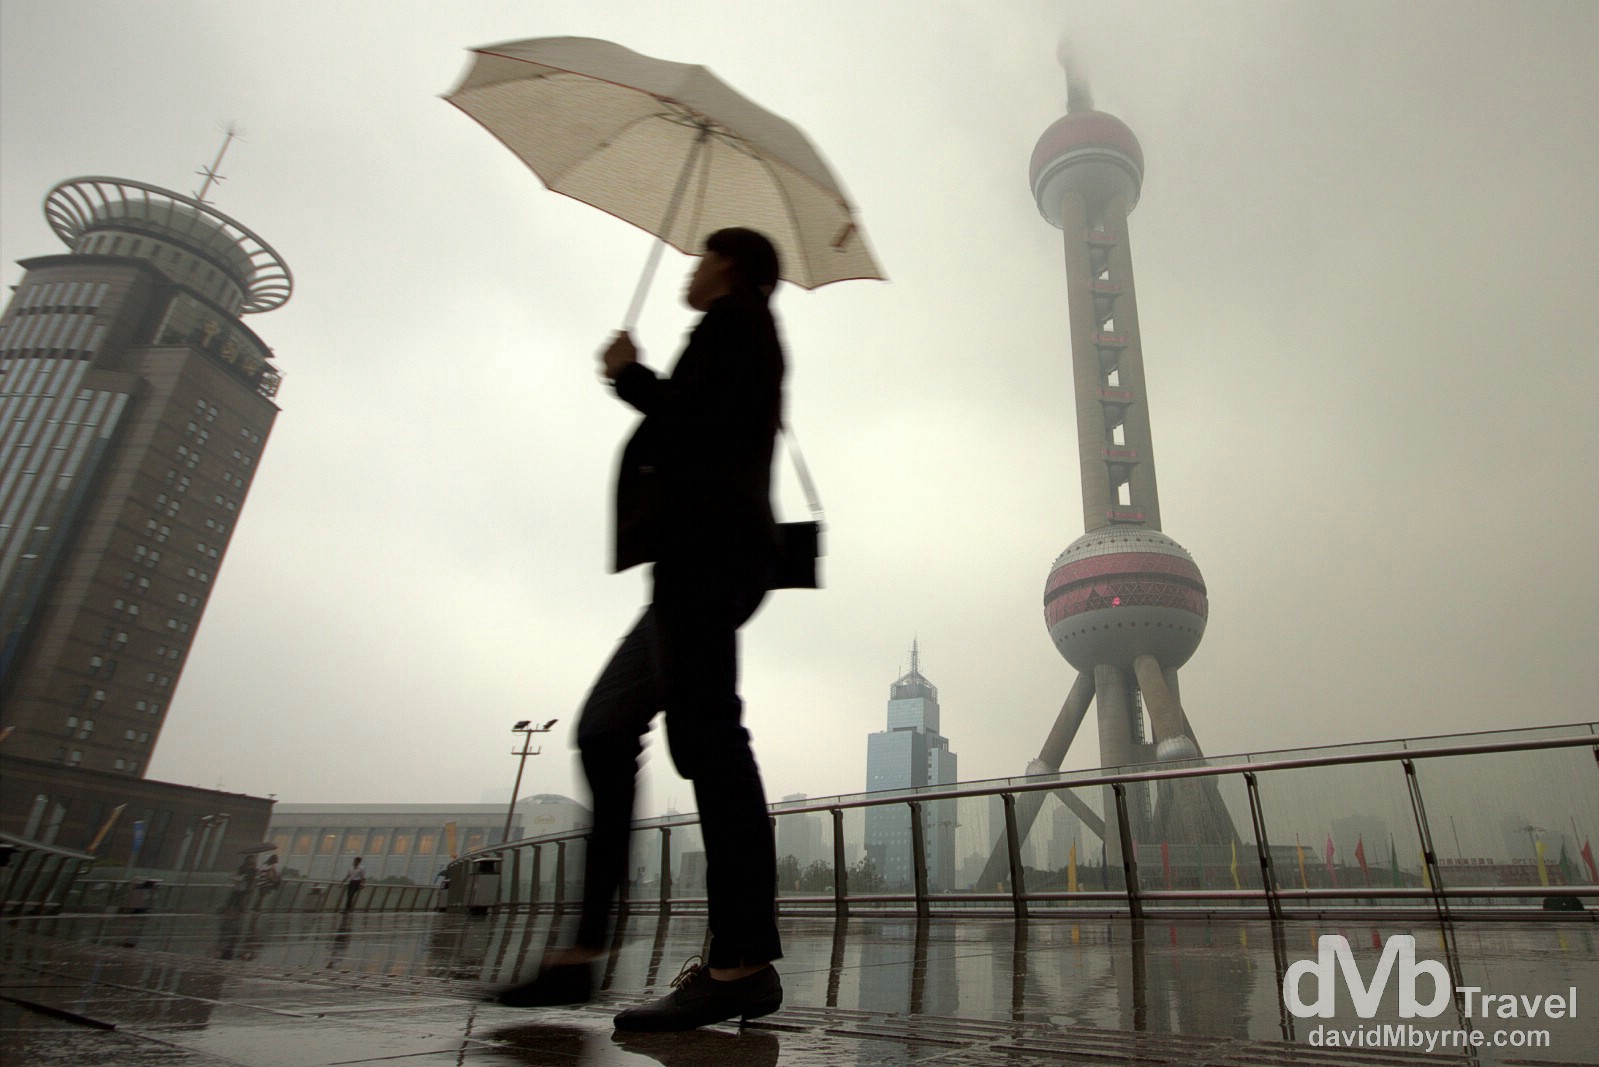 A dreary day in the Pudong area of Shanghai, China. October 22nd 2012.